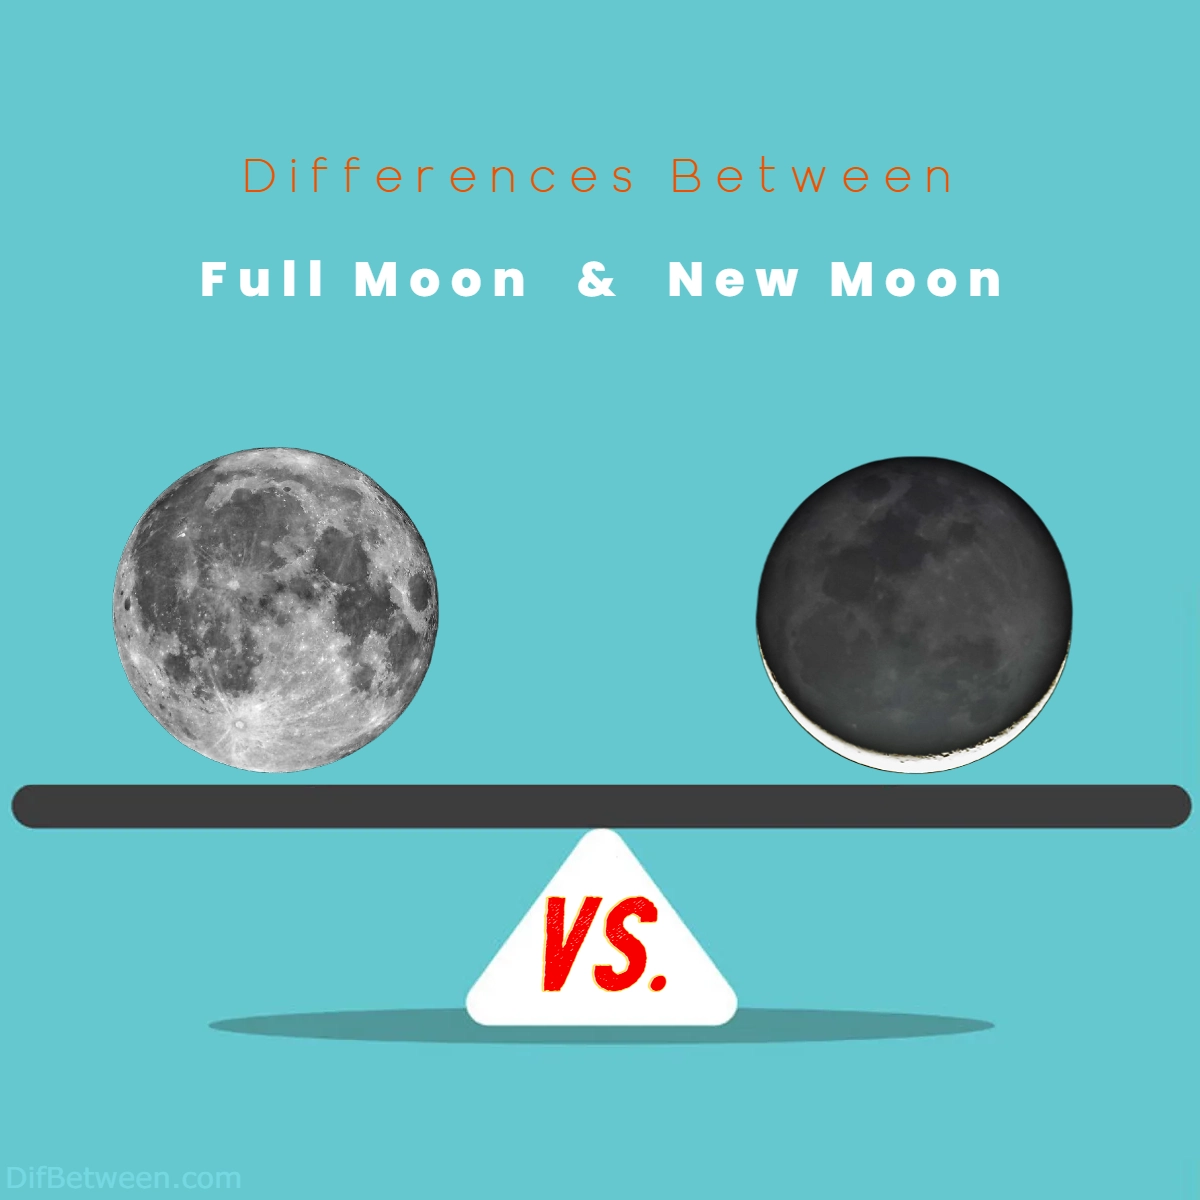 Difference Between Full Moon and New Moon